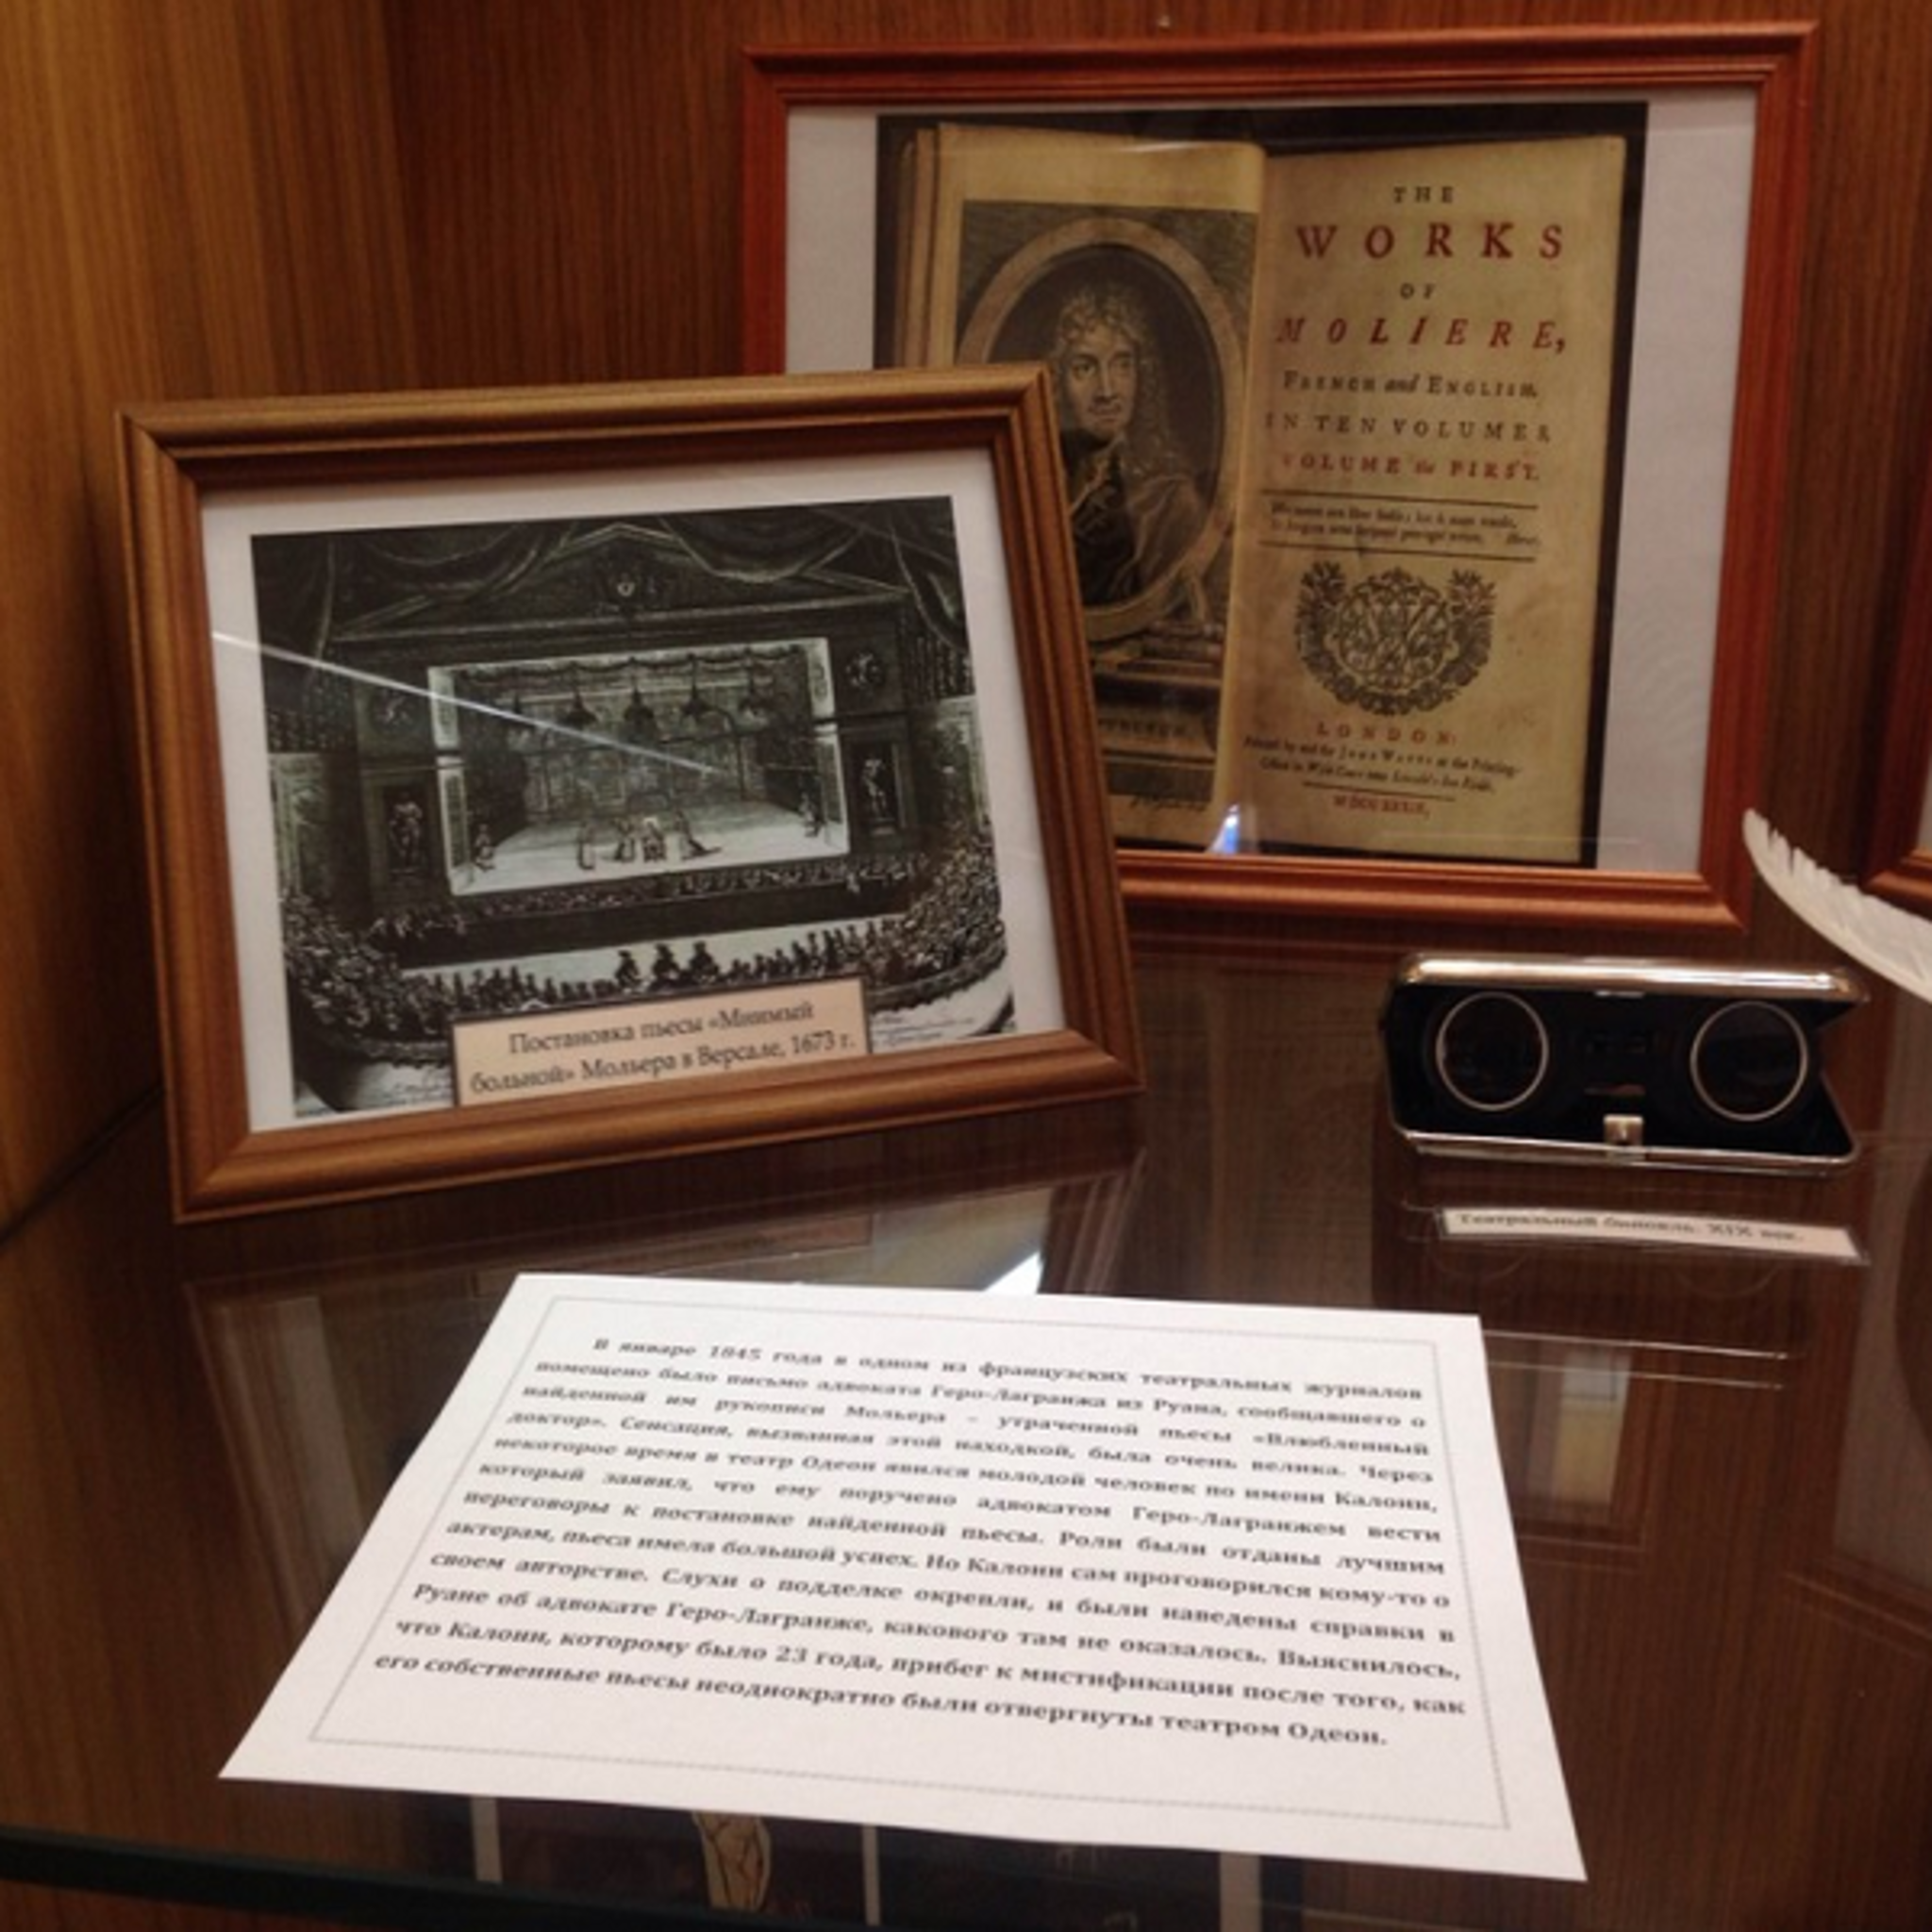 The exhibition The literary hoax: History revelations